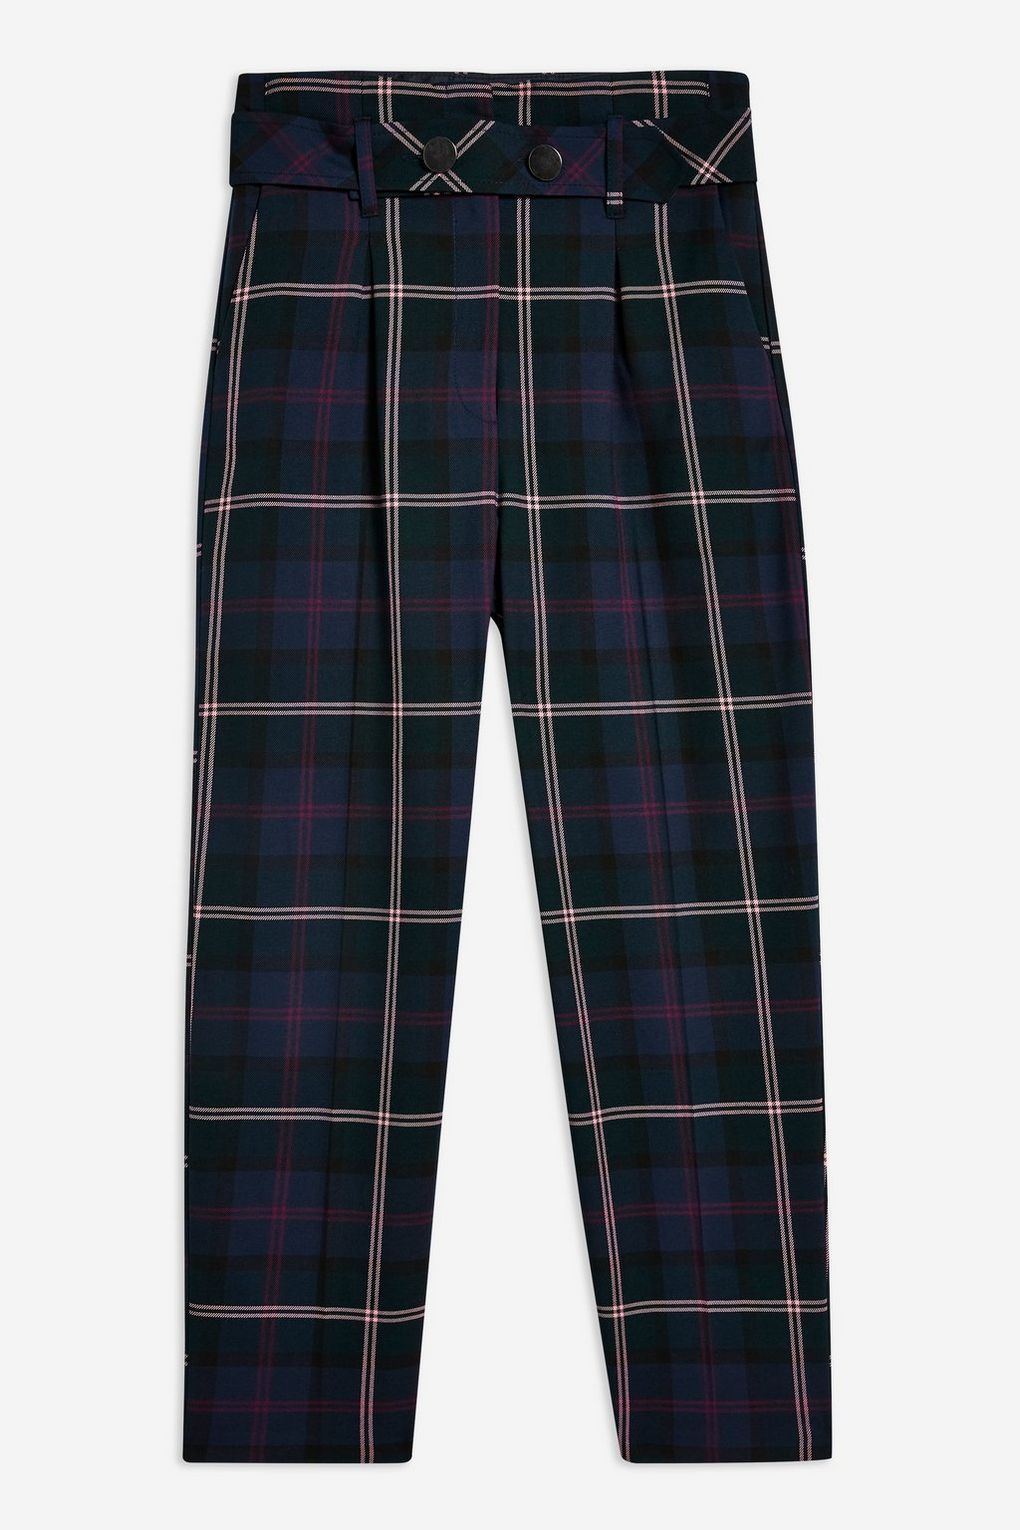 Topshop Green Punk Check Trousers  Fashion Checked trousers Leggings are  not pants